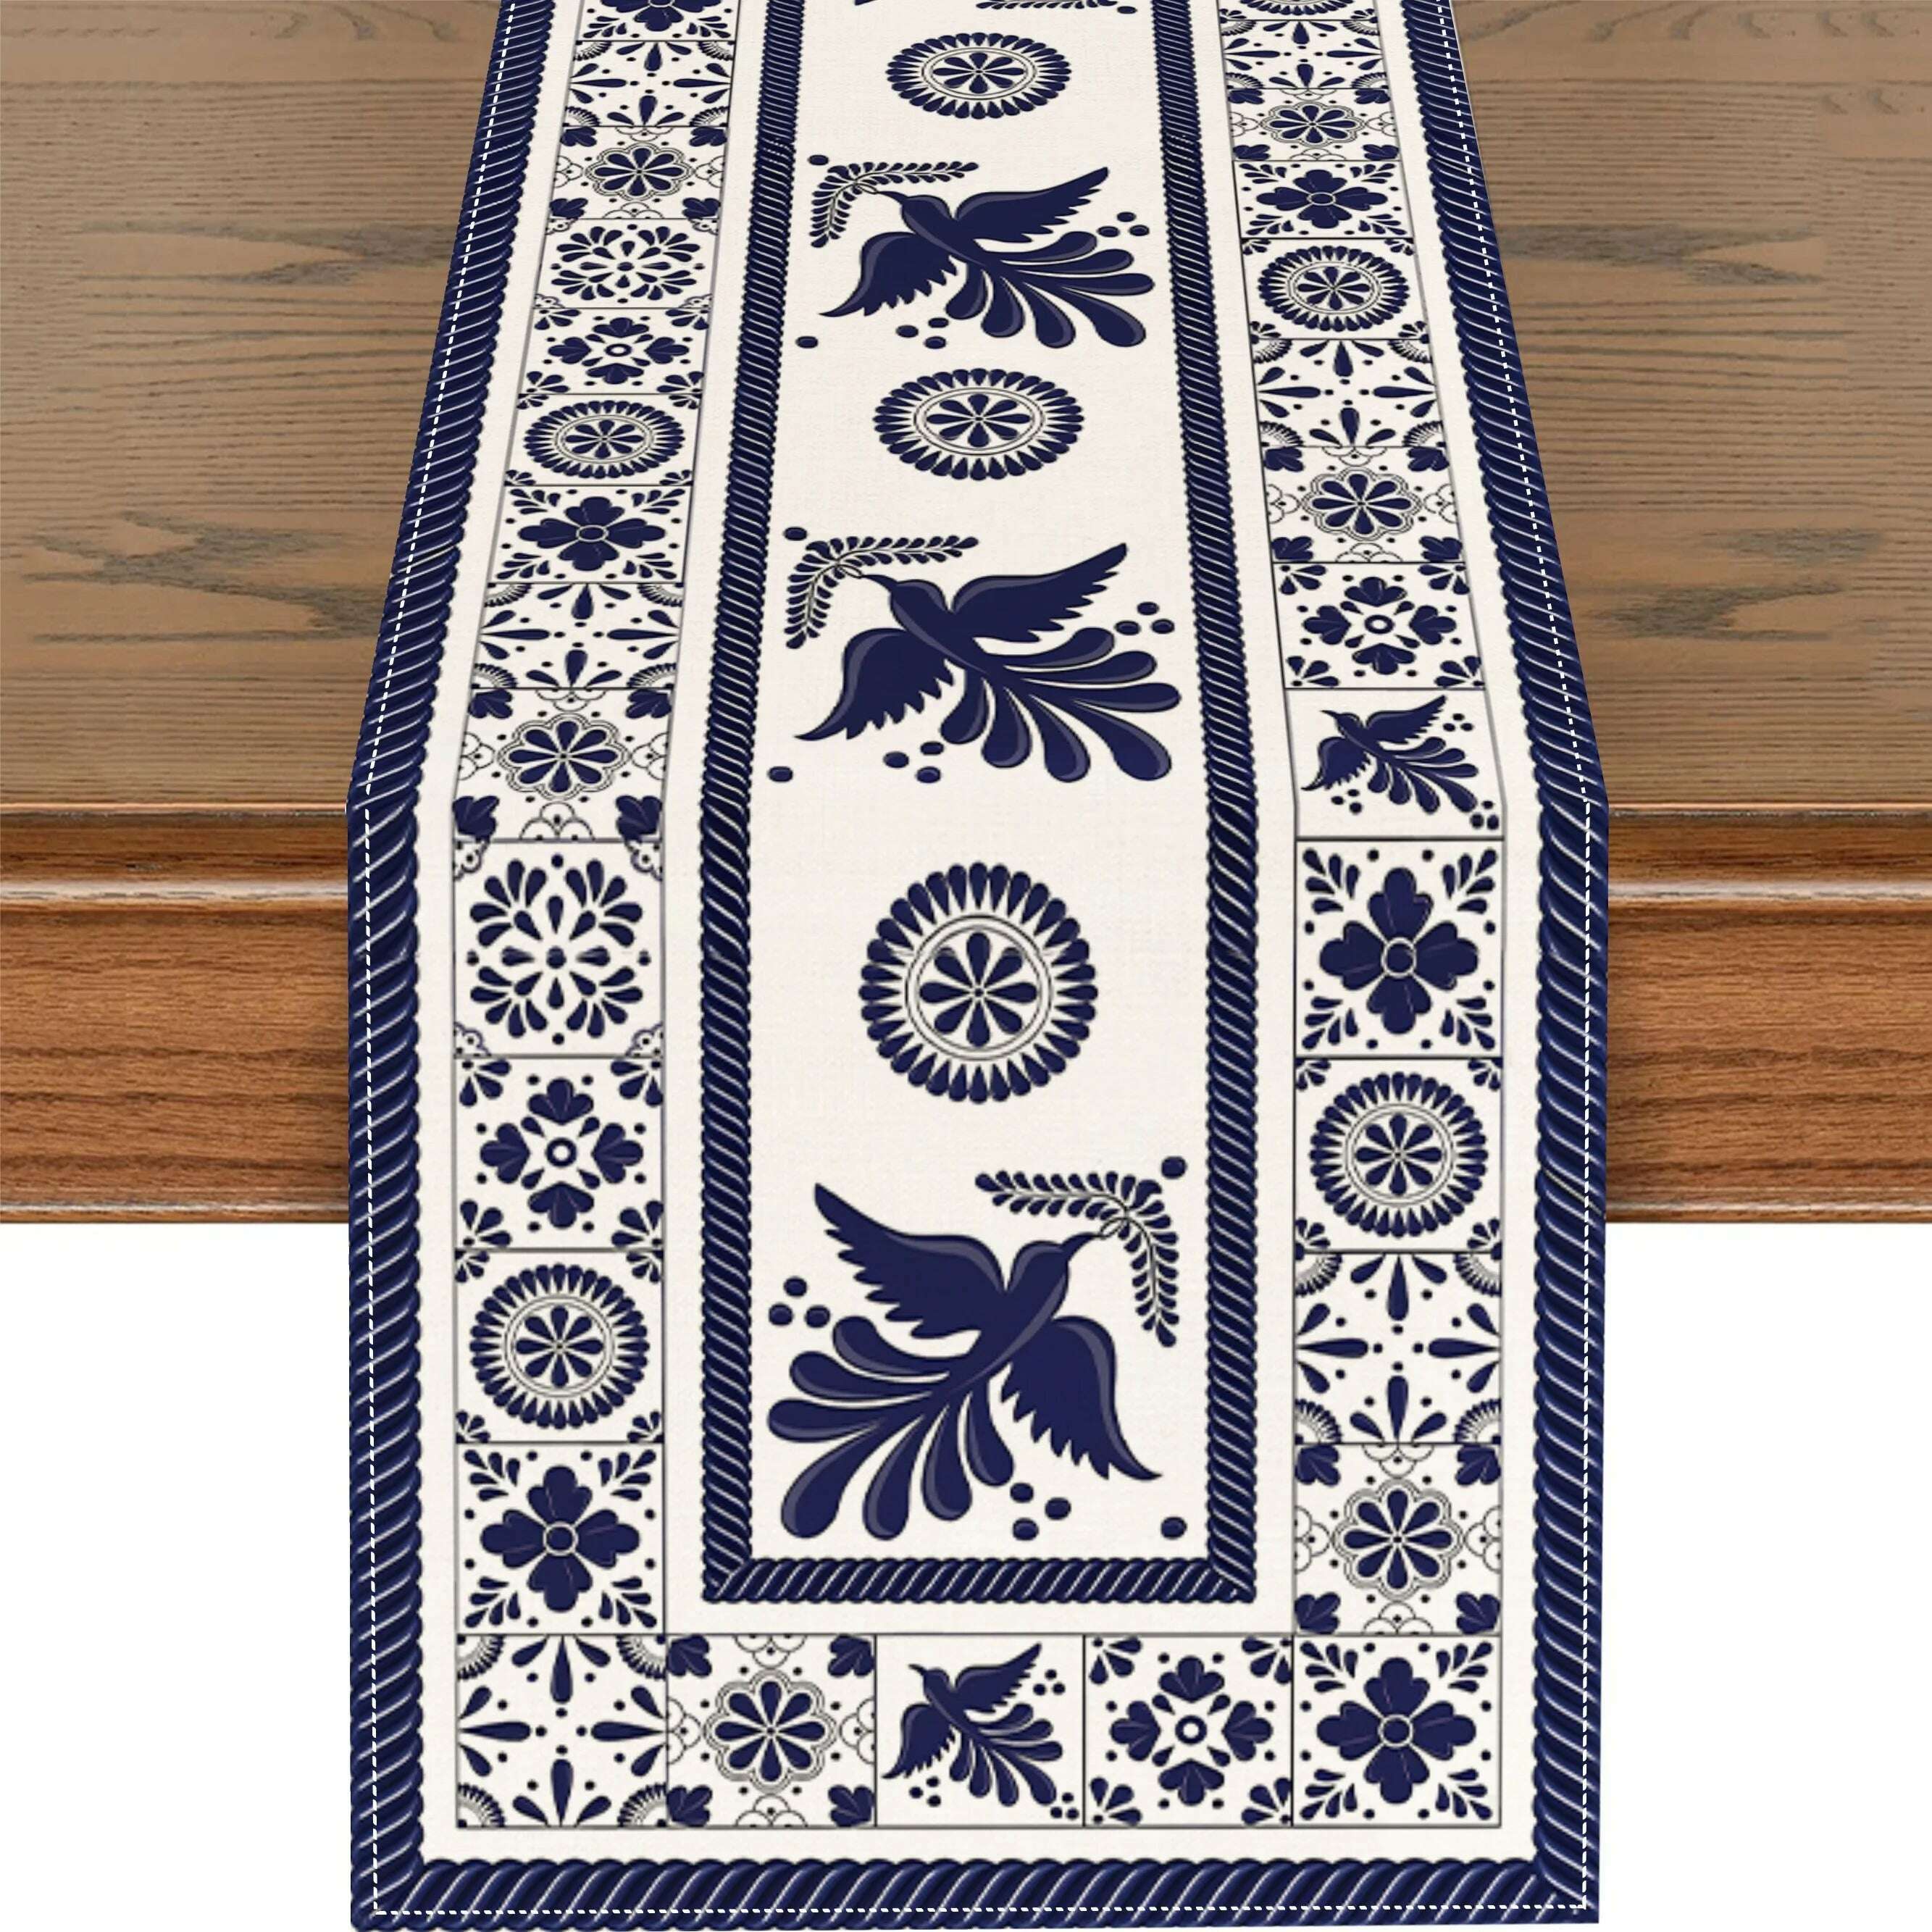 KIMLUD, Floral Bird Mexican Linen Table Runners Blue Patchwork Tiles Dresser Scarf Table Decor Holiday Wedding Party Dining Table Decor, 01 / 150x33cm 59x13inch, KIMLUD Womens Clothes